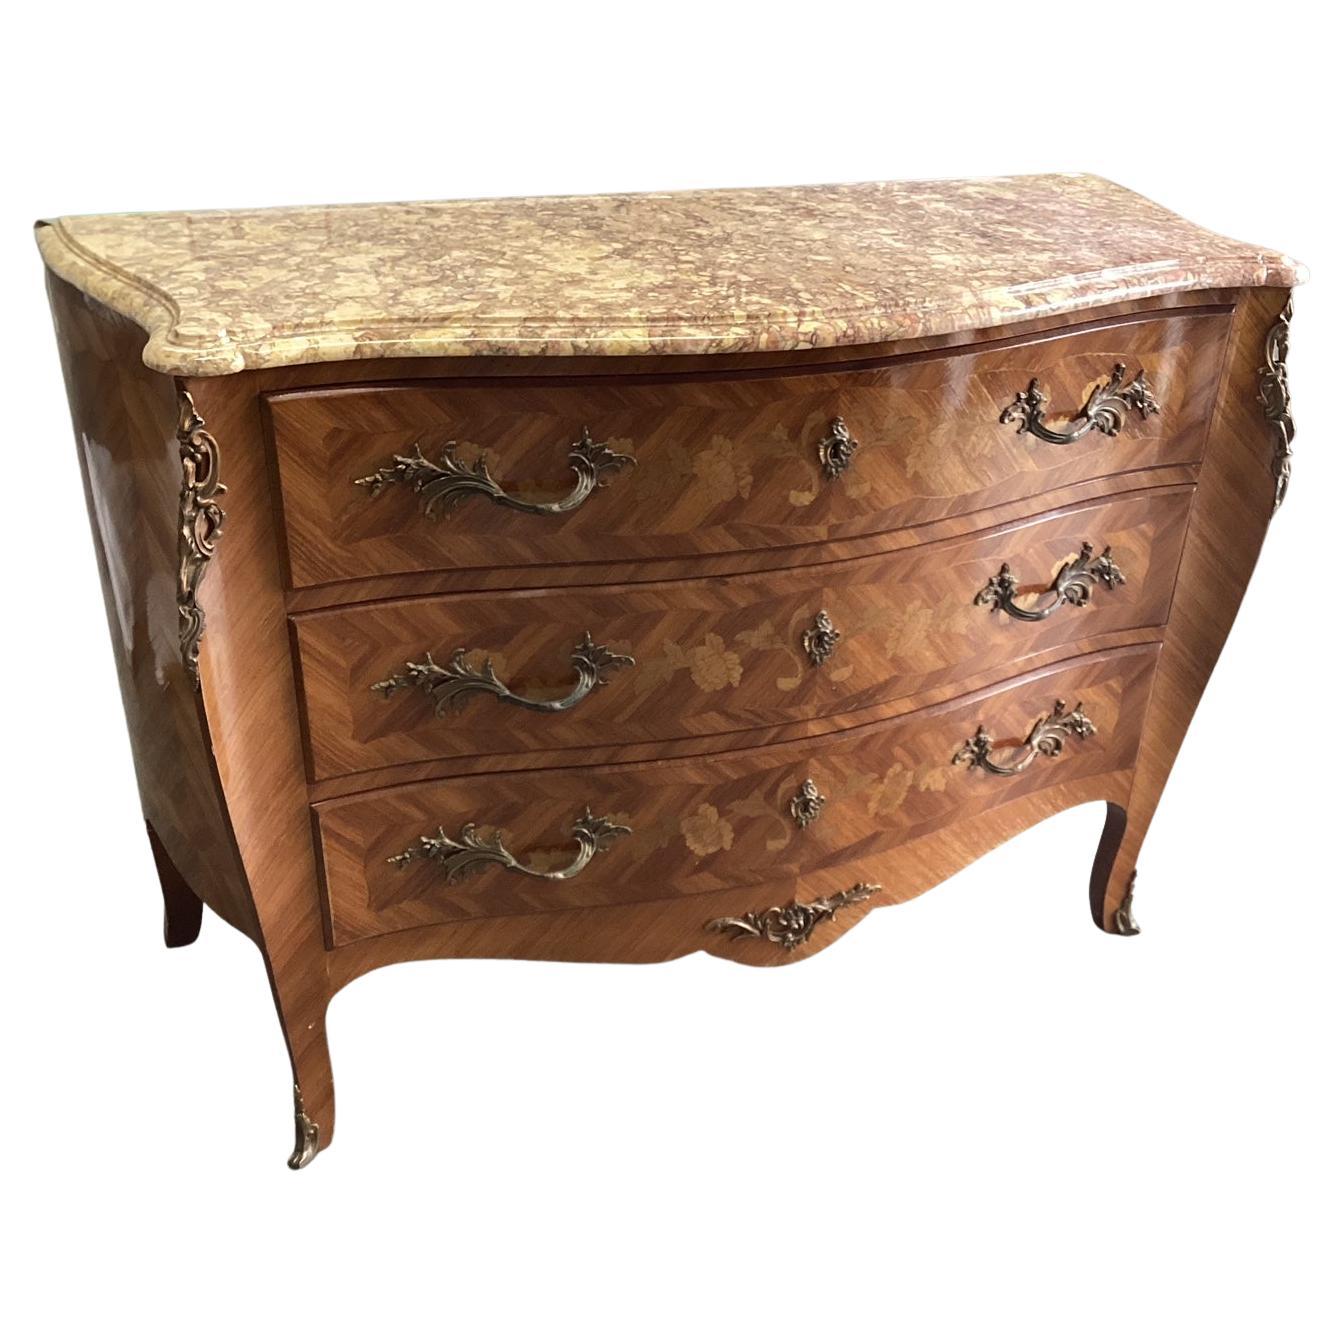 Beautiful Louis XV bombe chest of drawers with satinwood inlay. Made in France in the 1920's this chest features 3 wide drawers and a stunning pink marble top. The marble is beveled and the corners are rounded for added elegance. This chest features